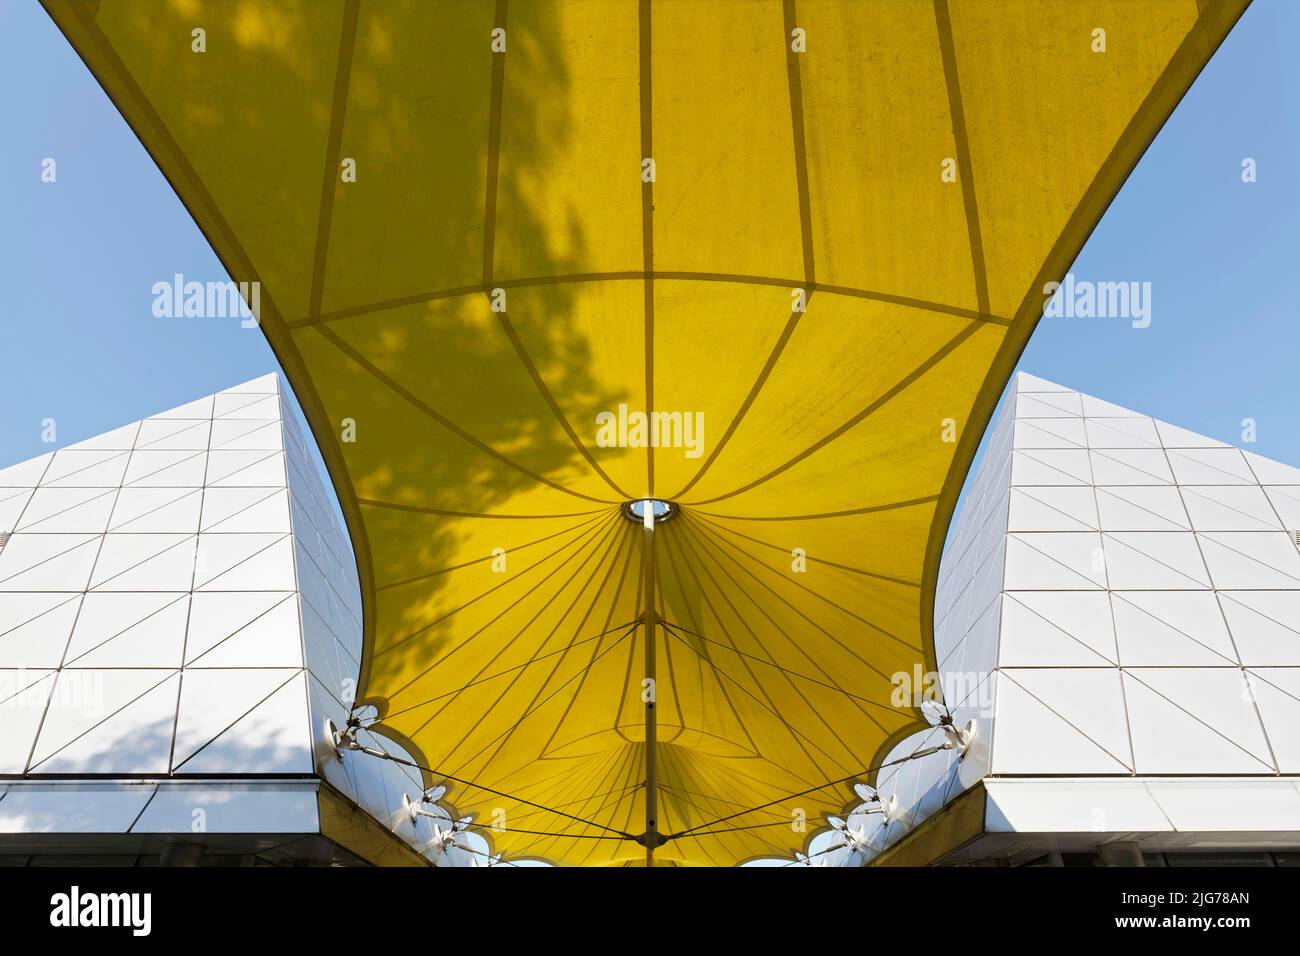 Yellow awning with shadow of a tree, modern architecture, Duesseldorf Airport, North Rhine-Westphalia, Germany Stock Photo